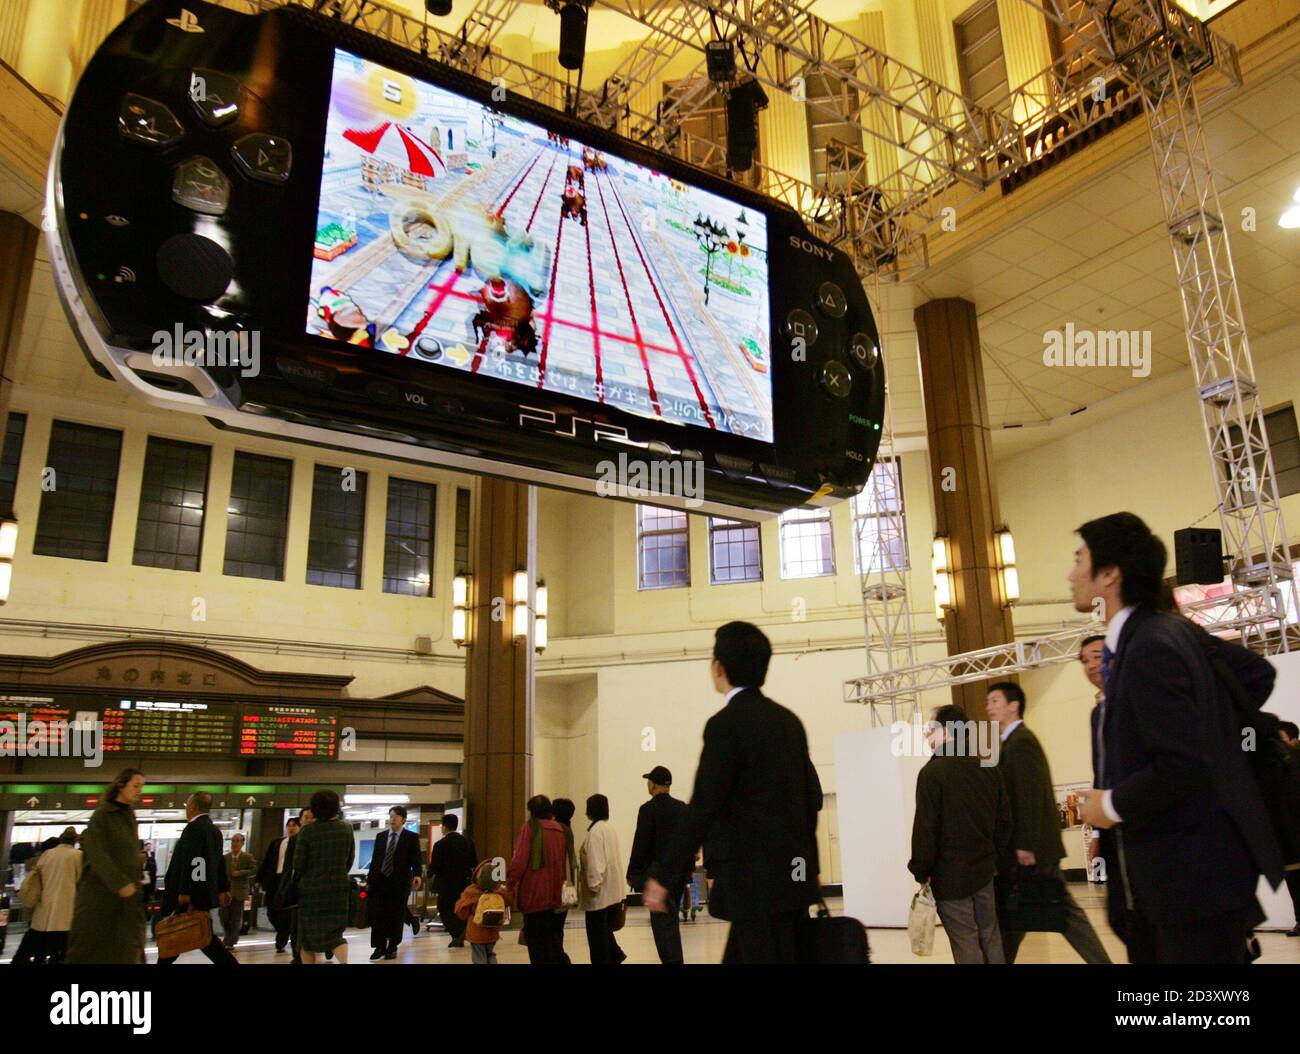 An eight metre wide (26 feet) PlayStation Portable (PSP) mock-up hangs  above passers-by at a Tokyo station November 29, 2004. Sony plans to begin  selling its new PSP hand-held console, which will